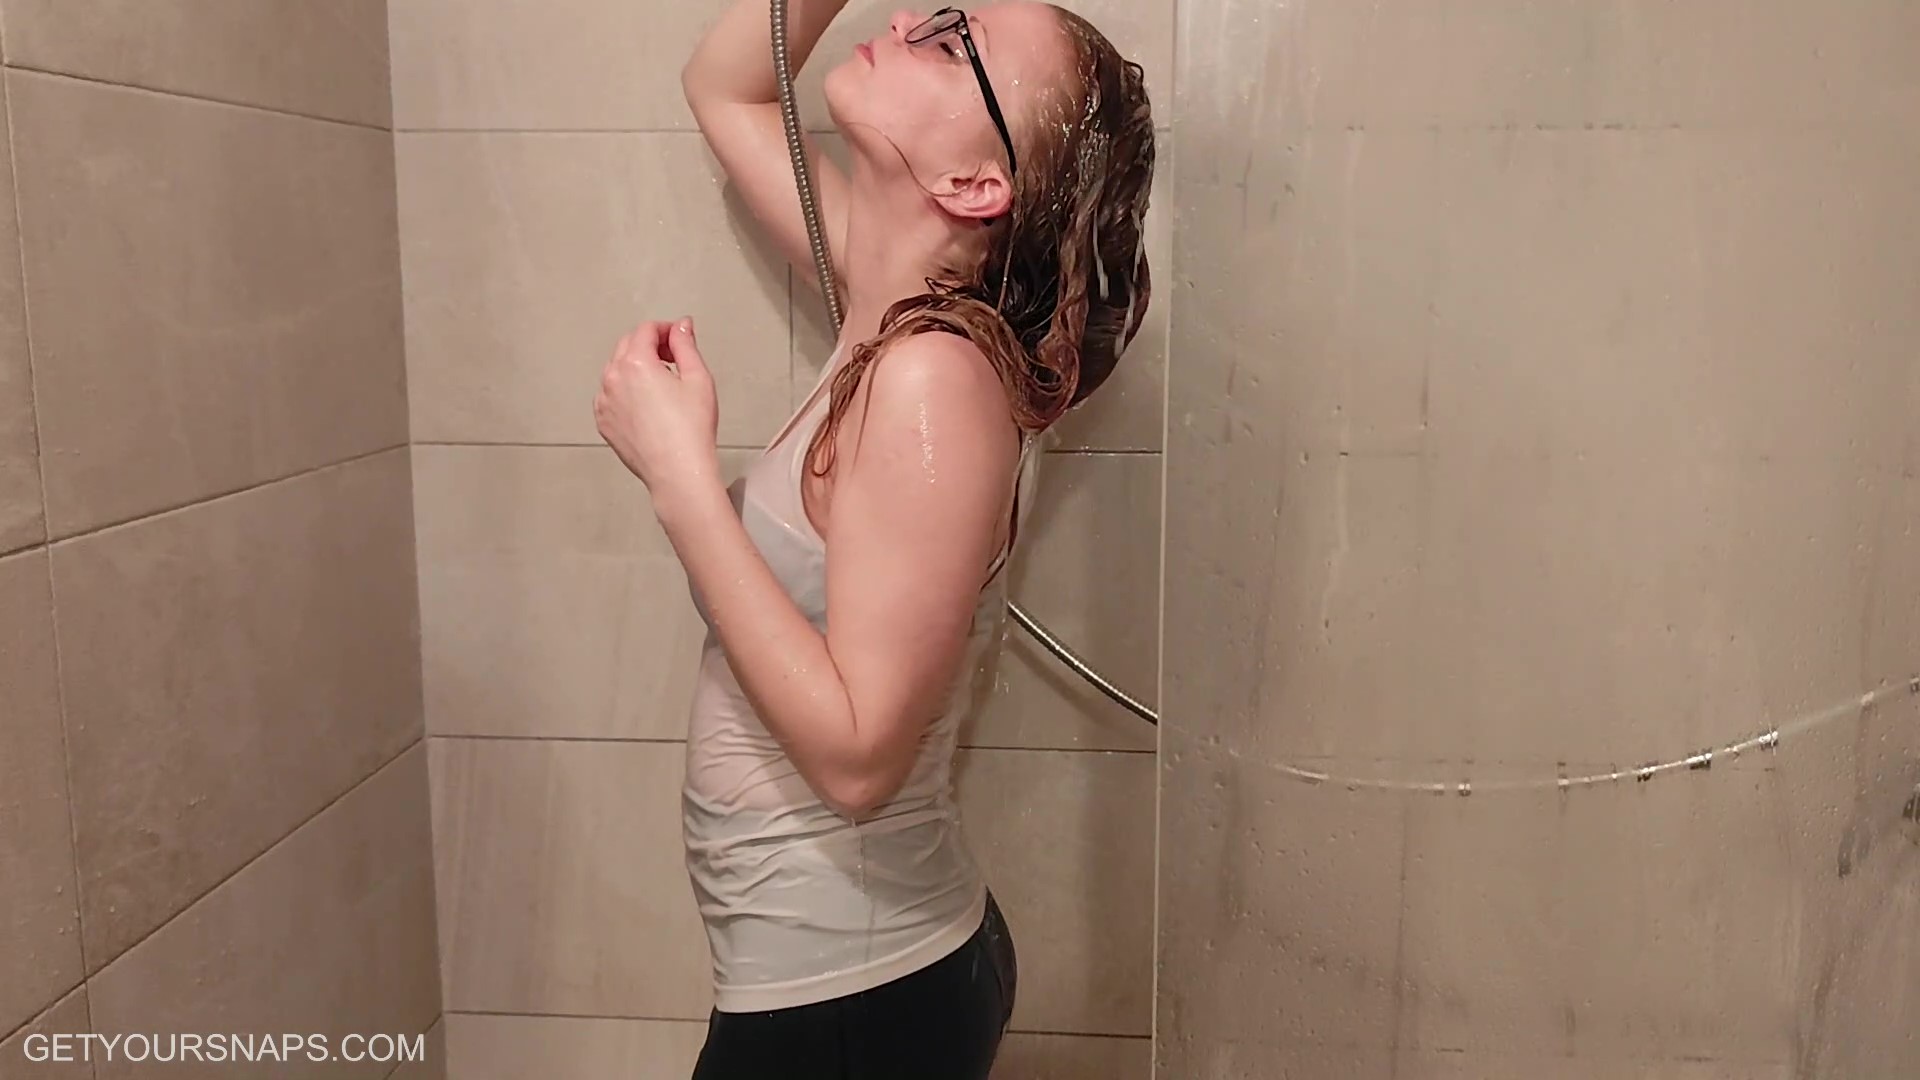 Sarah gets wet in white top and green leatherlook leggings - frame at 7m9s